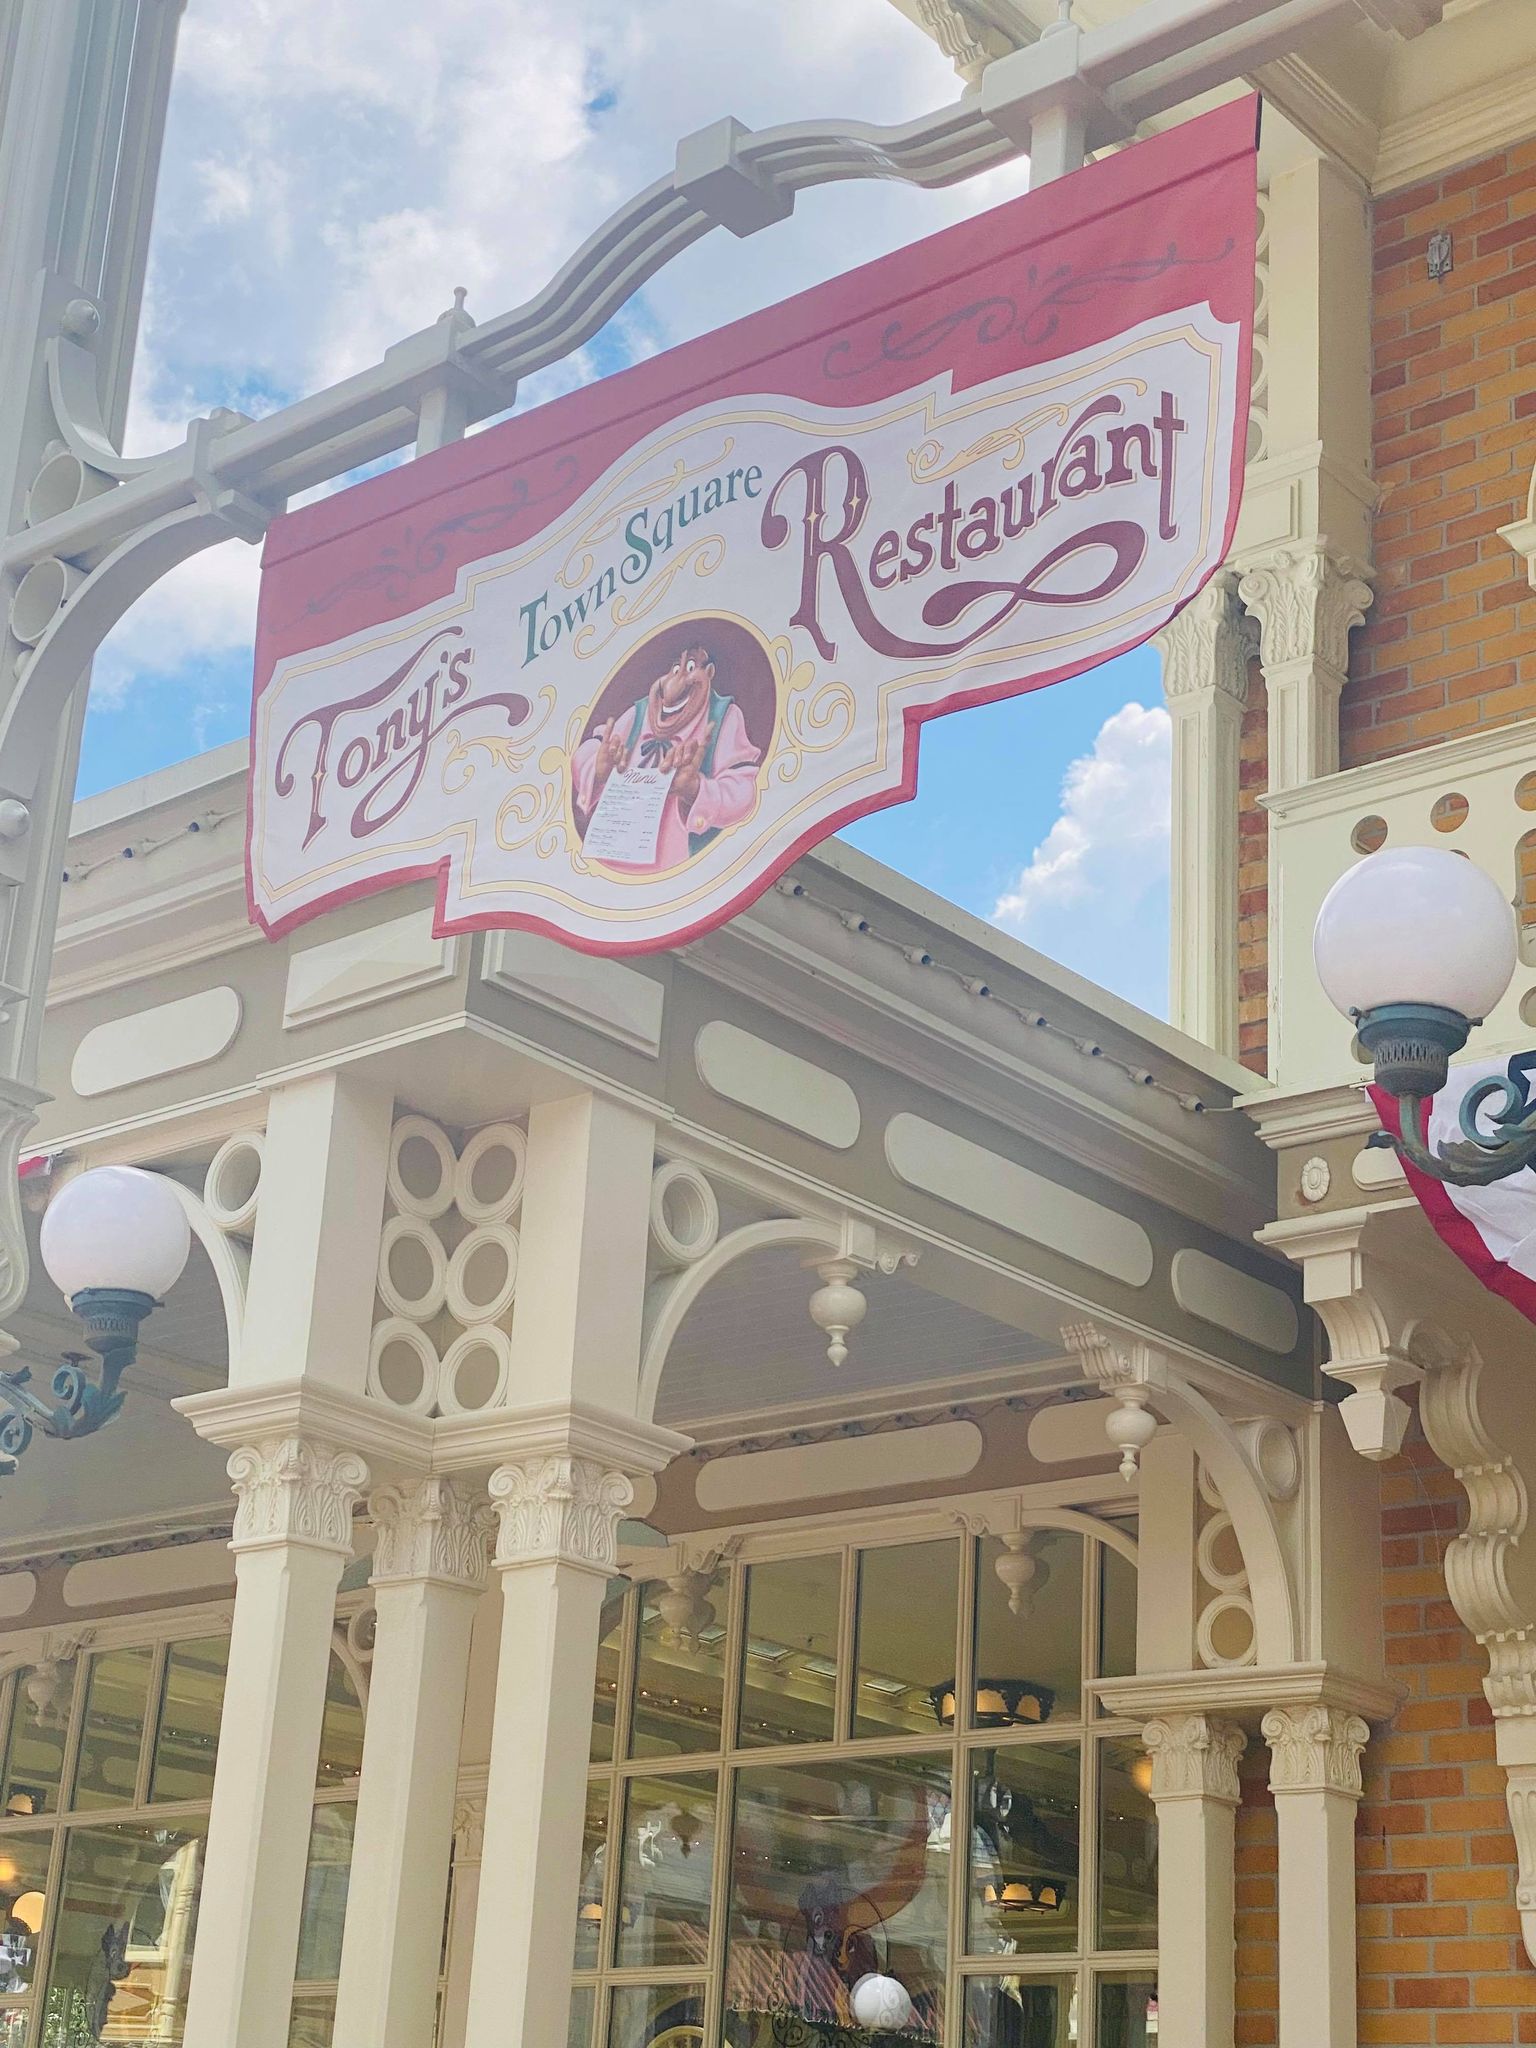 Tony's Town Square Restaurant Gets a New Sign - MickeyBlog.com